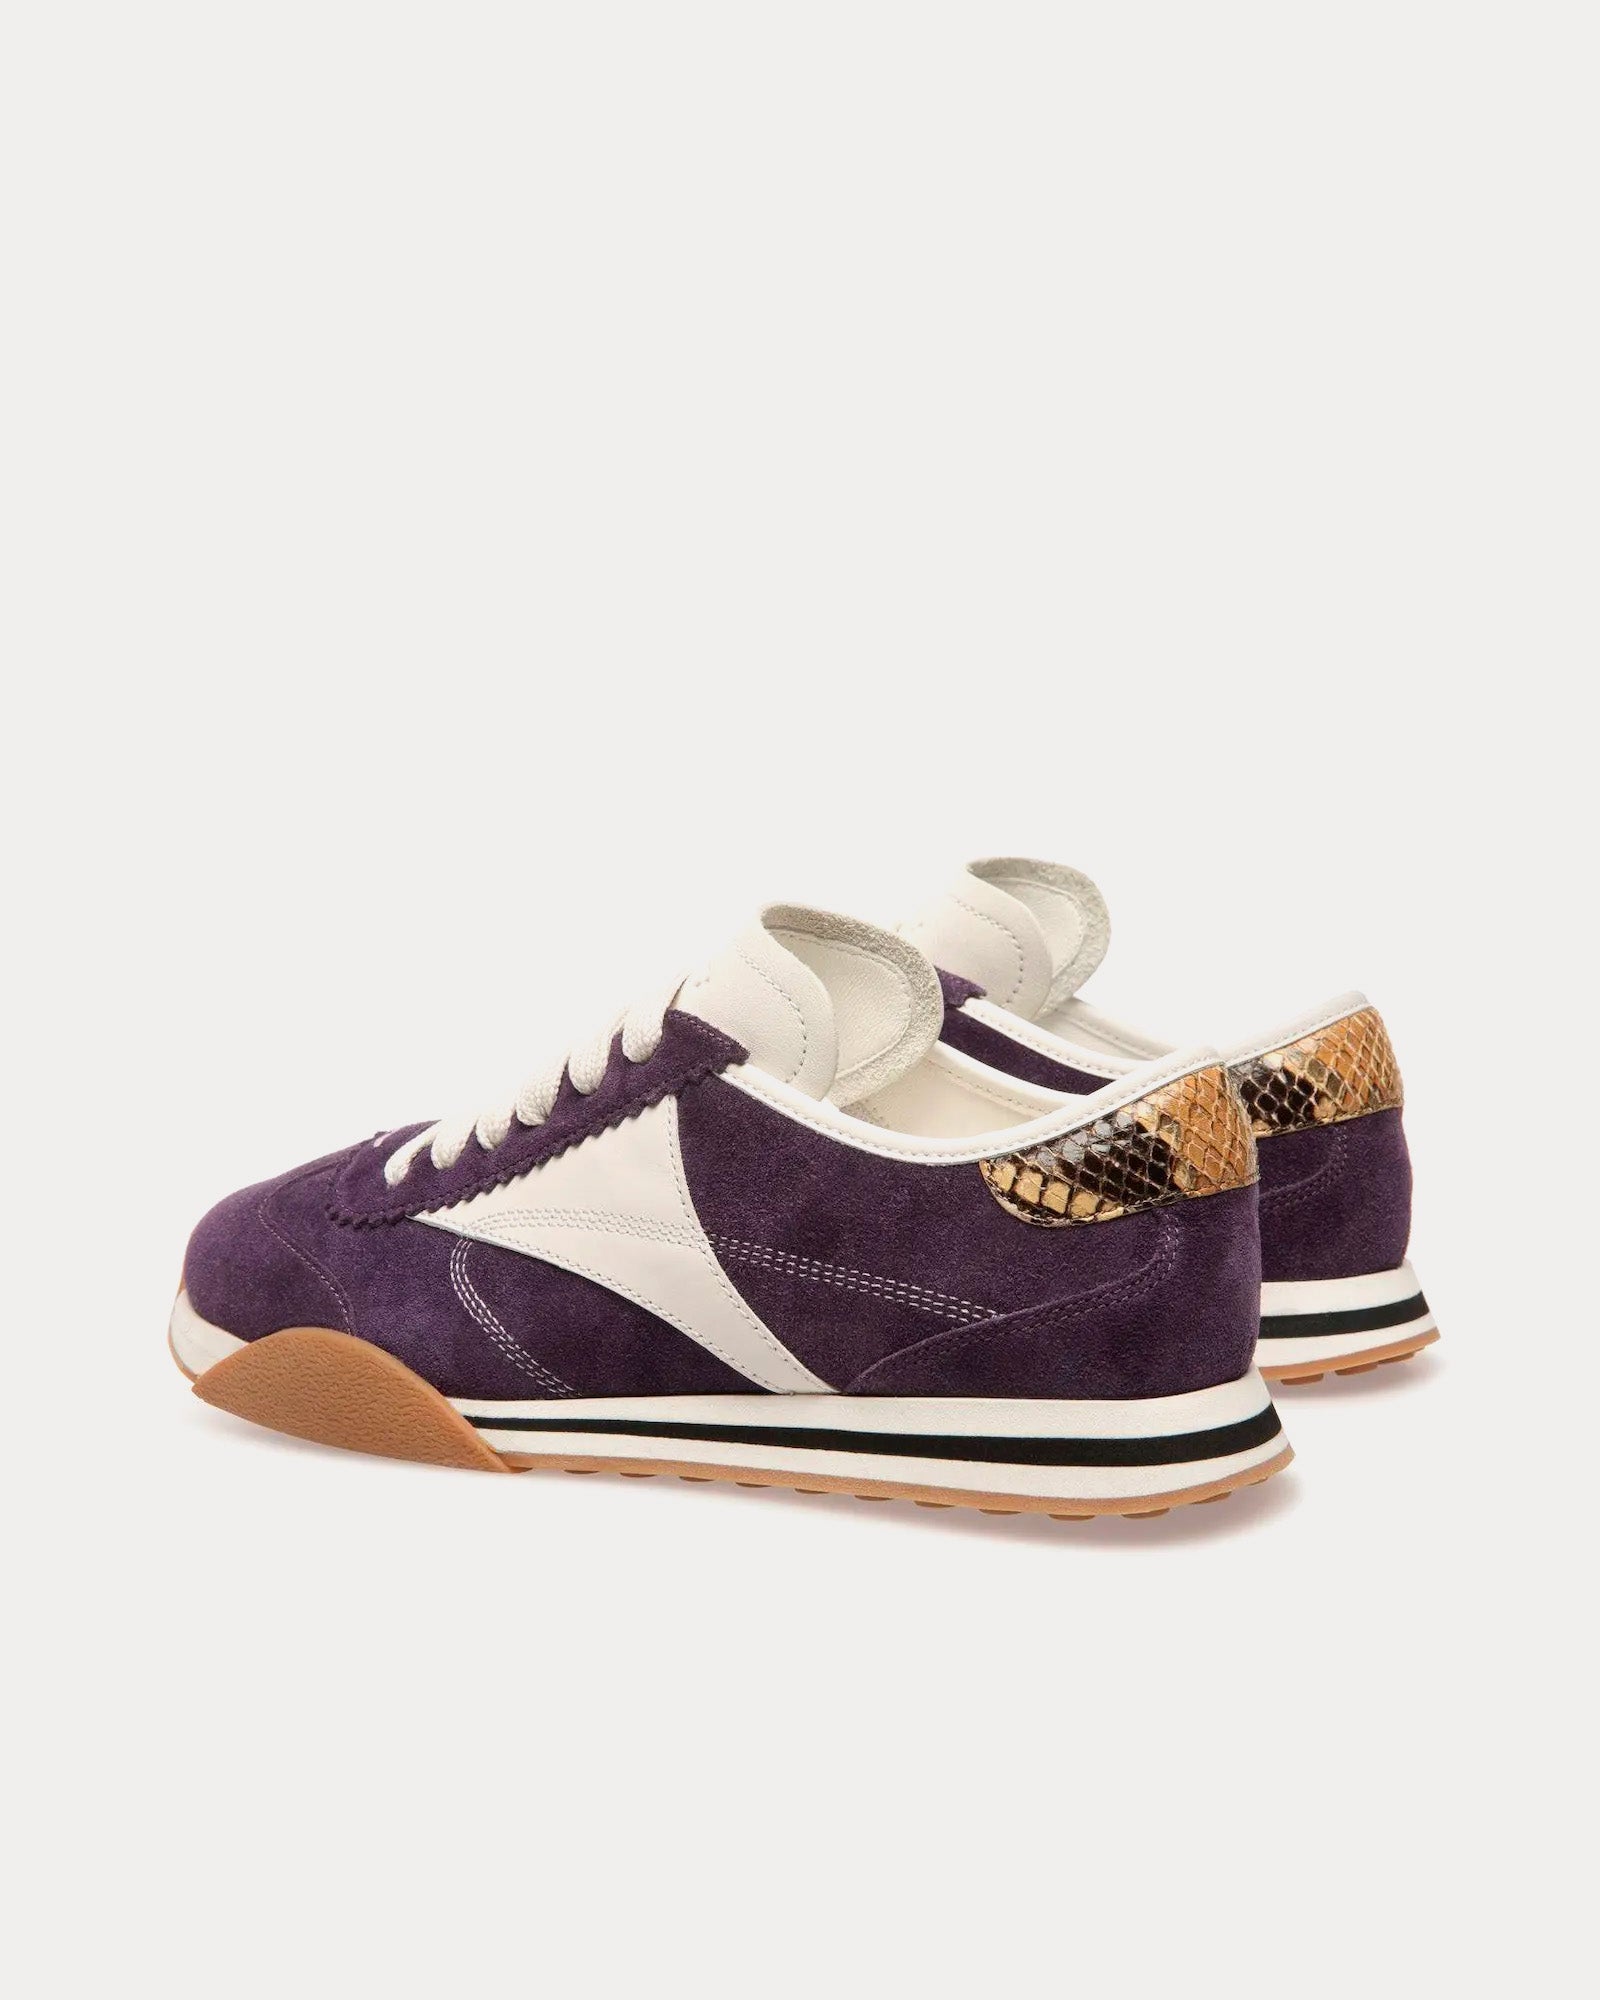 Bally - Sussex Leather Purple / White Low Top Sneakers